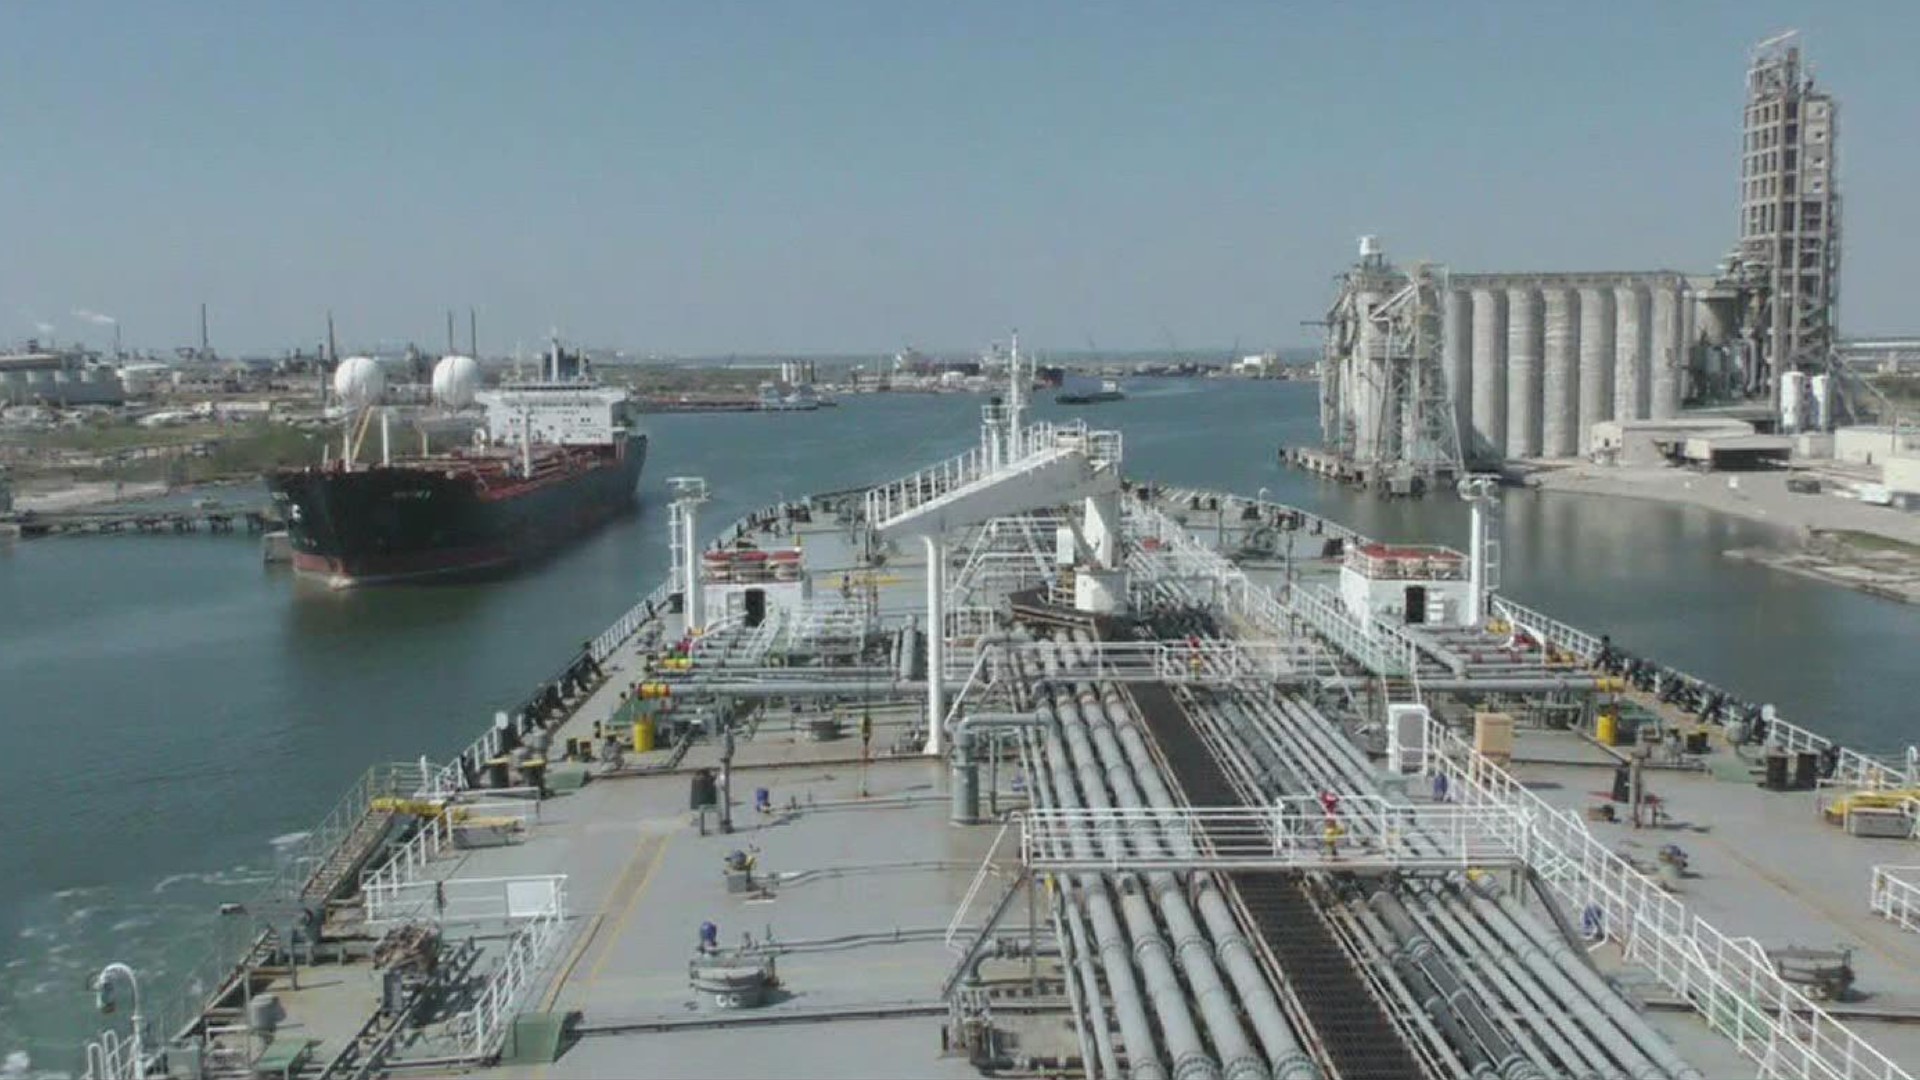 The annual tonnage record is a milestone driven in large part by a big increase in shipments of liquefied natural gas.